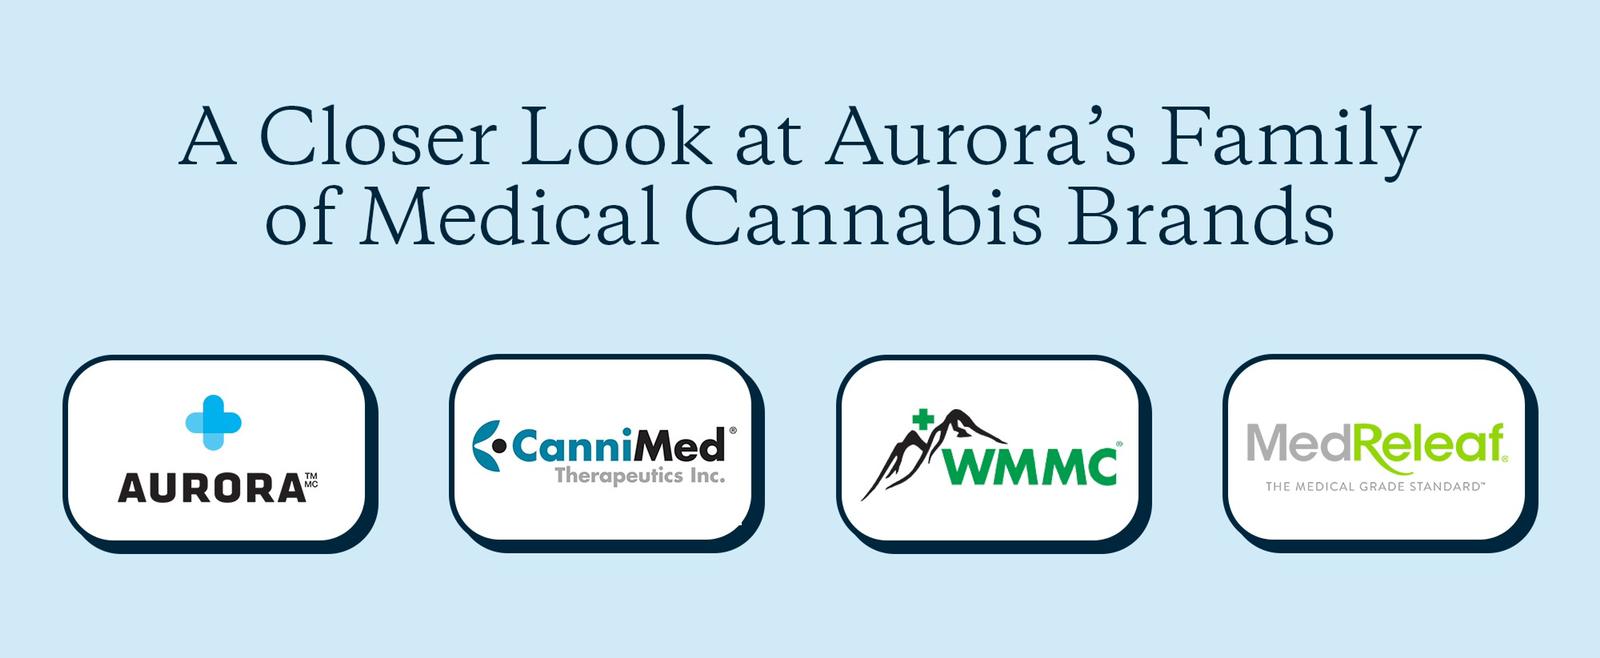 A Closer Look at Aurora’s Family of Medical Cannabis Brands